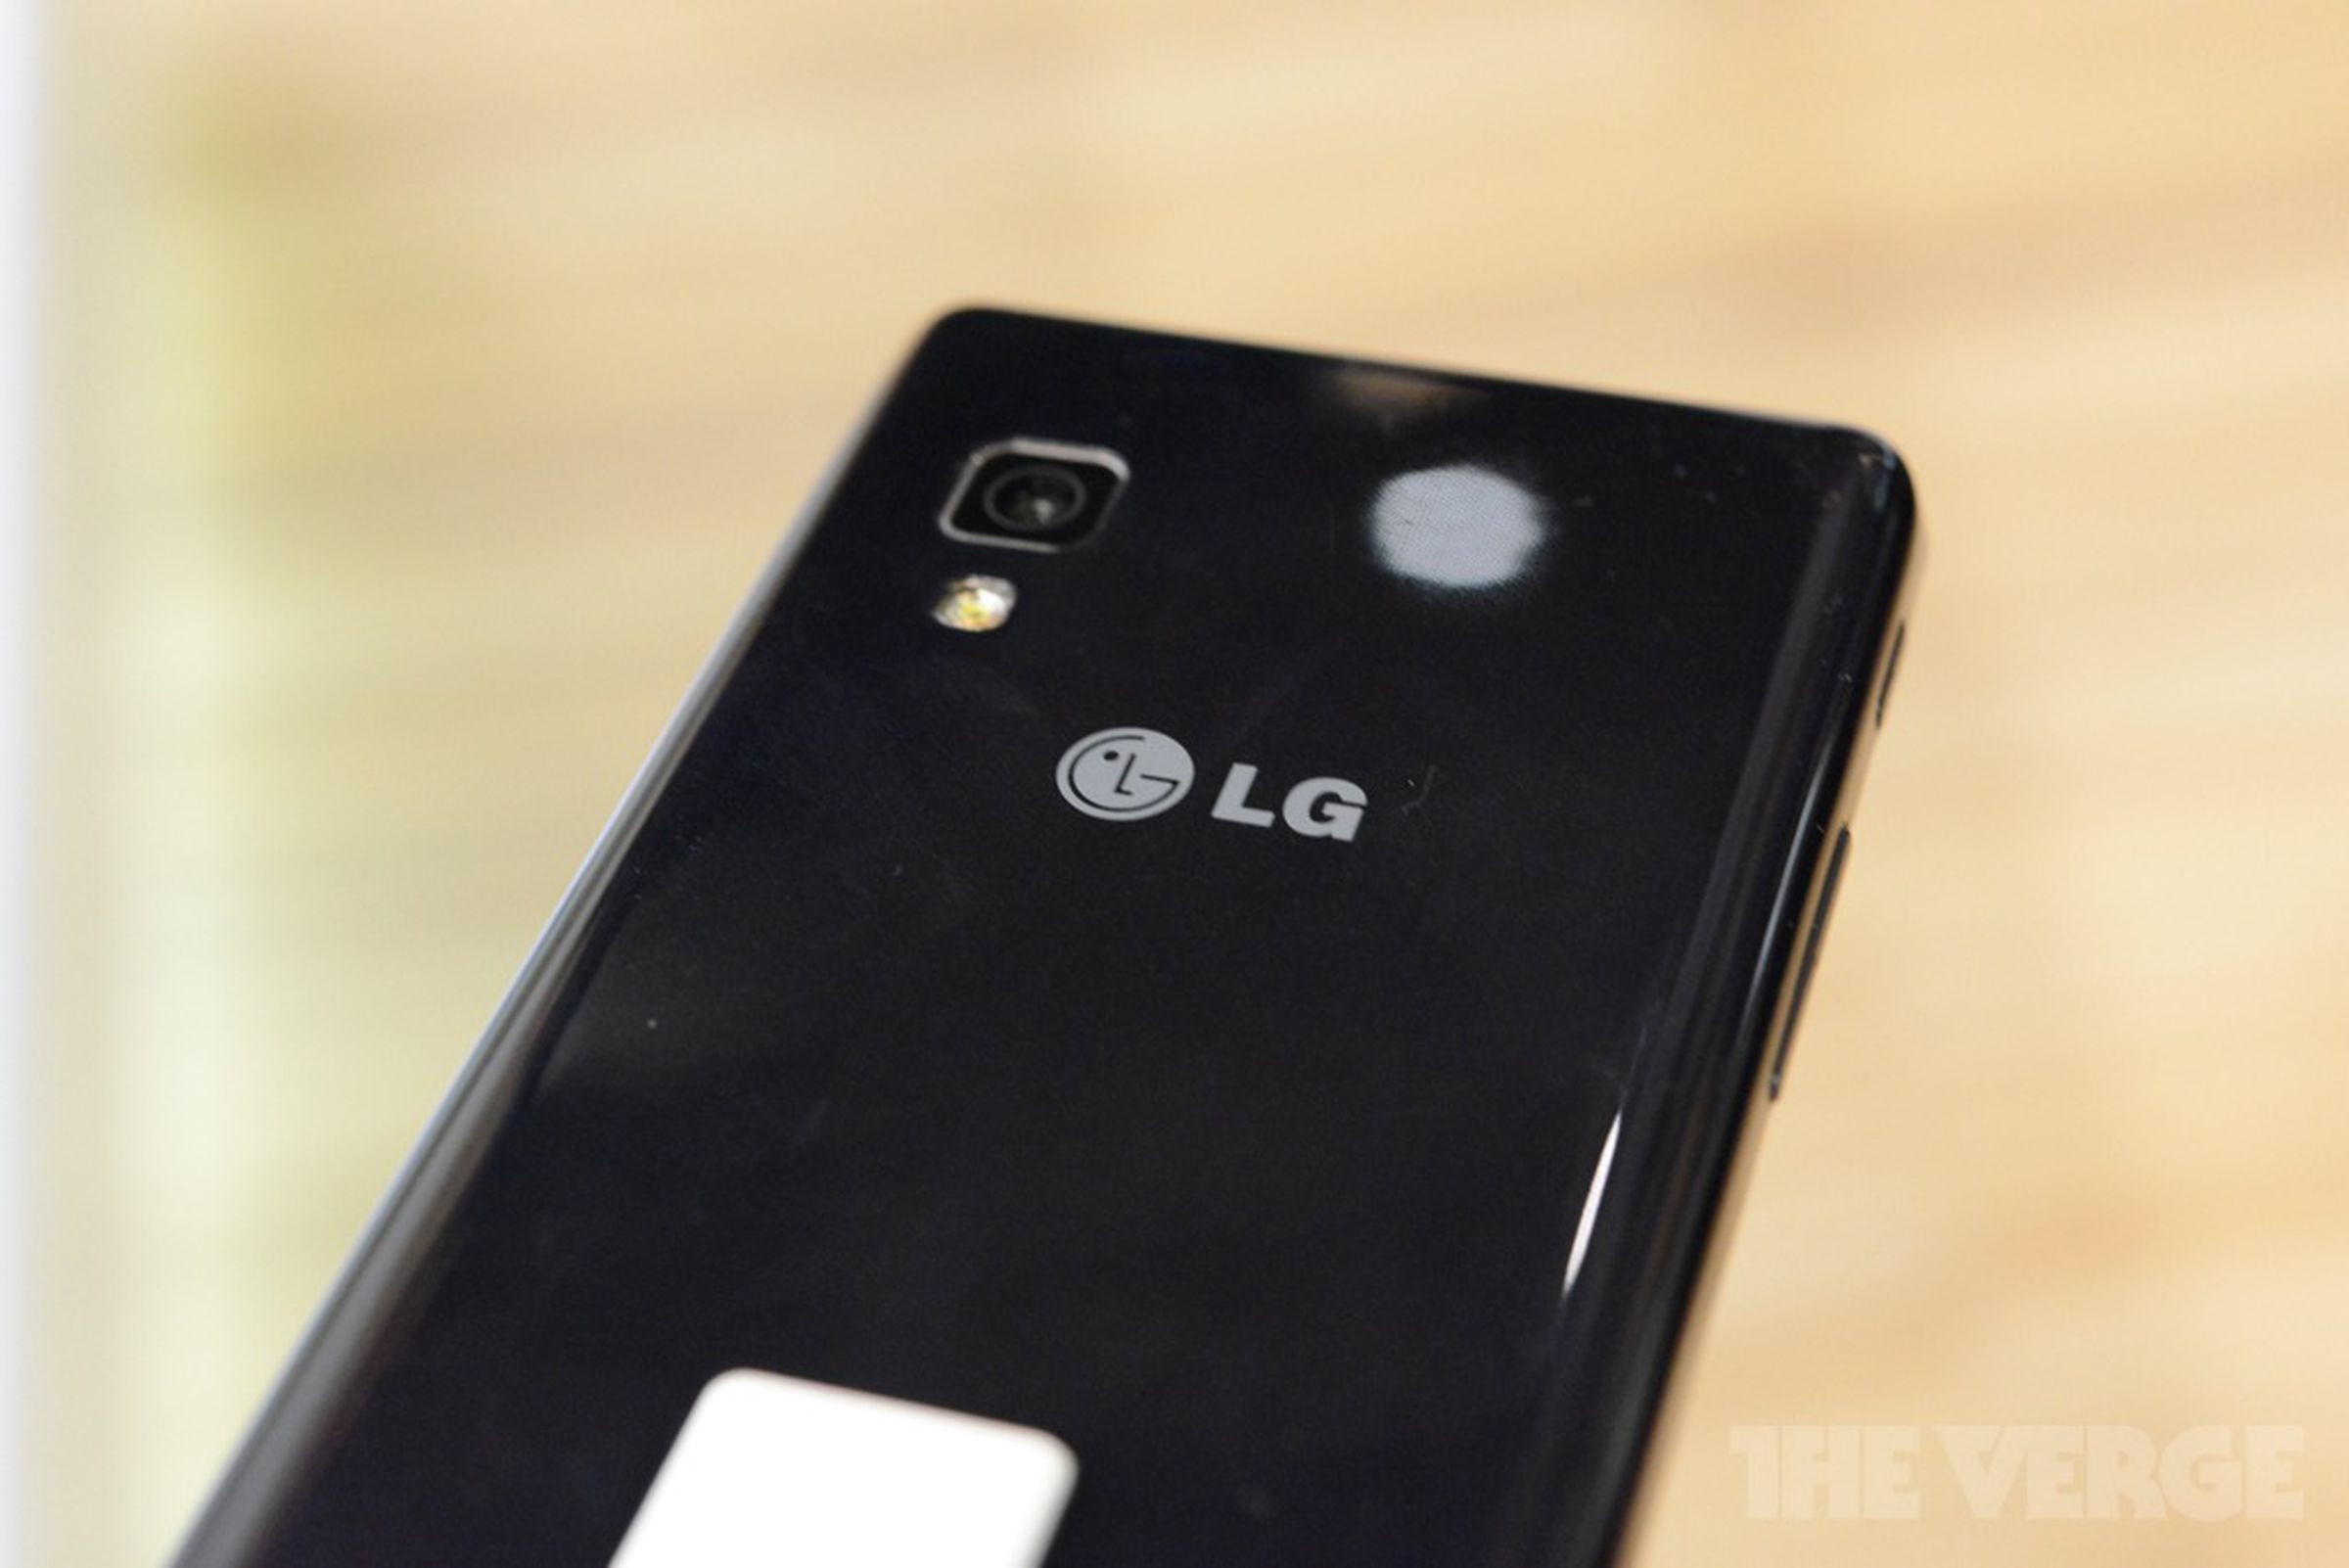 LG Optimus L5 II hands-on pictures